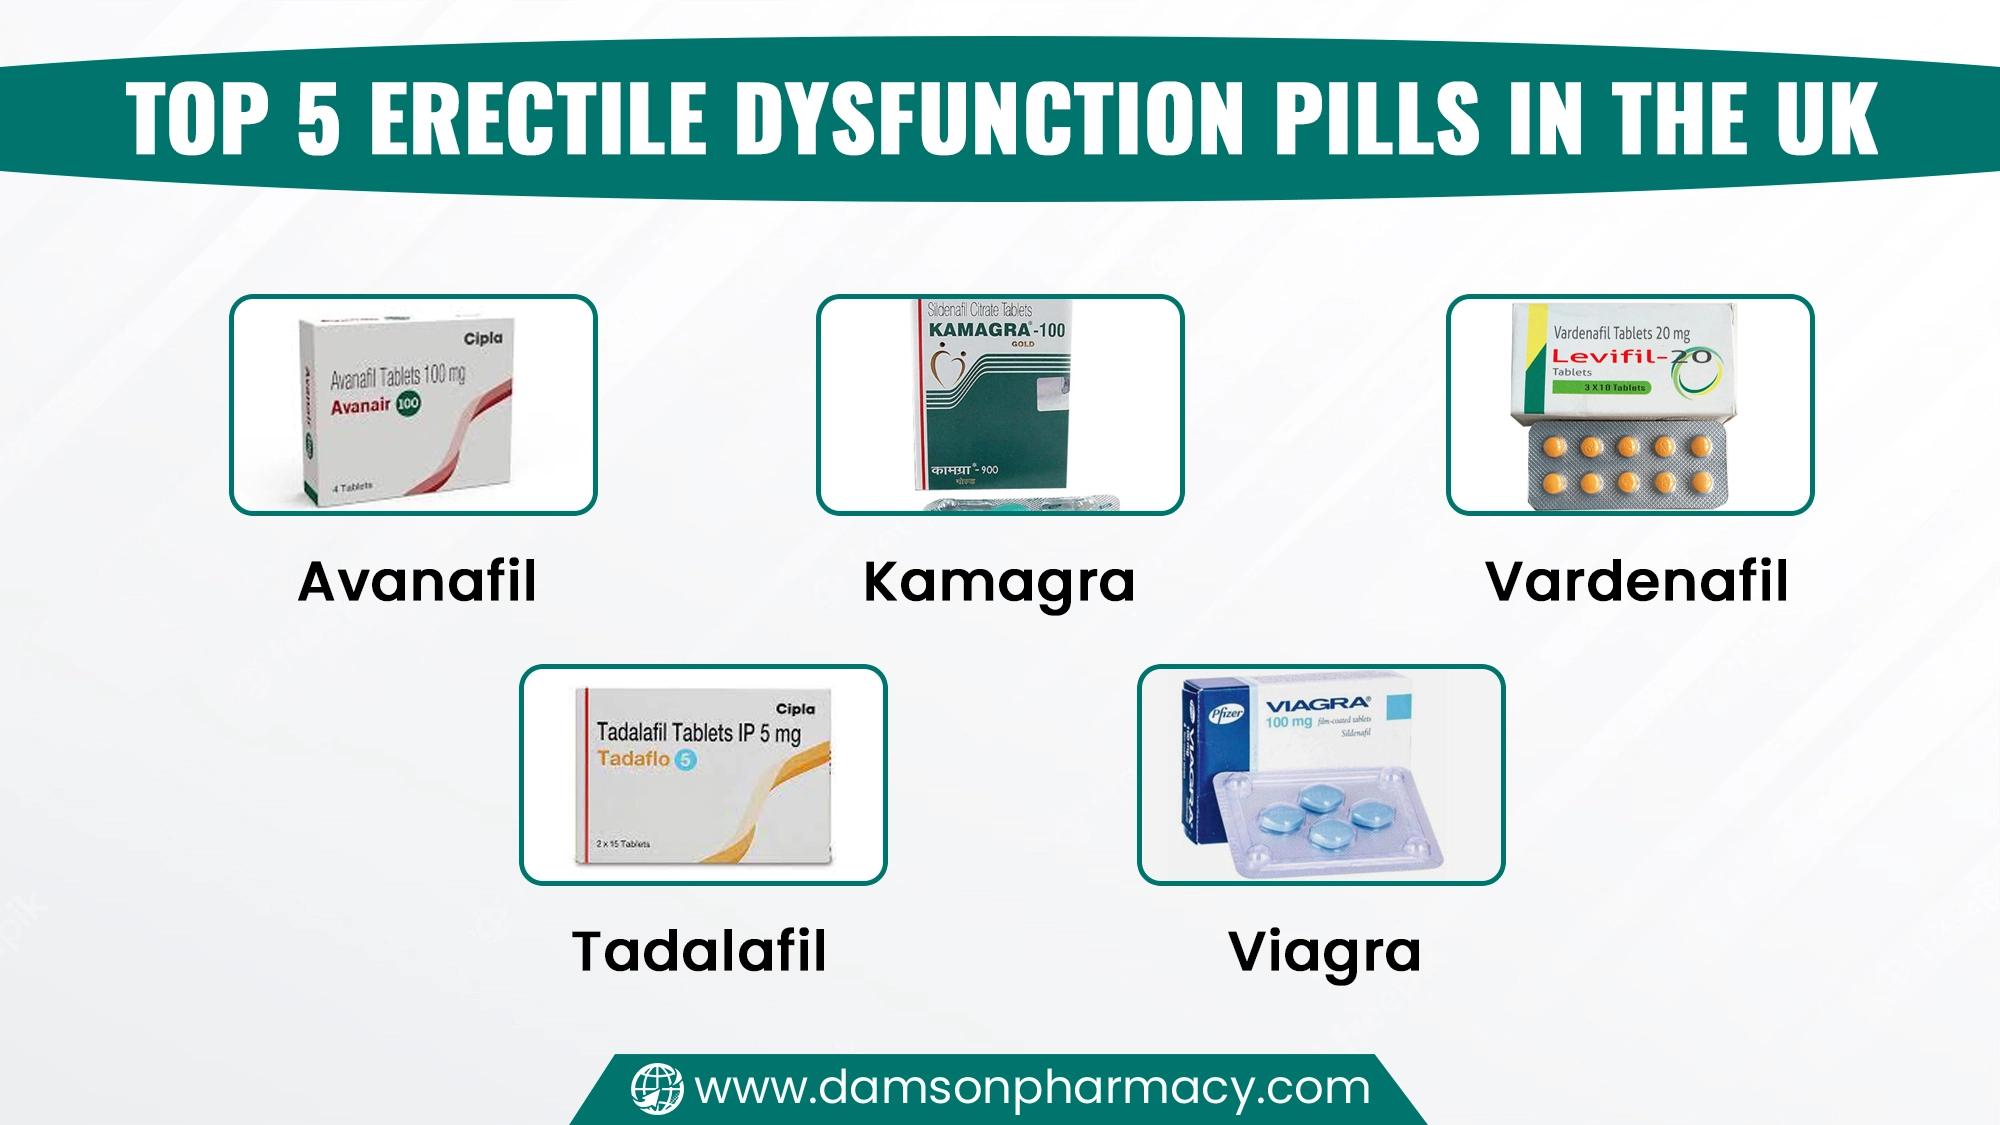 Top 5 Erectile Dysfunction Pills in the UK